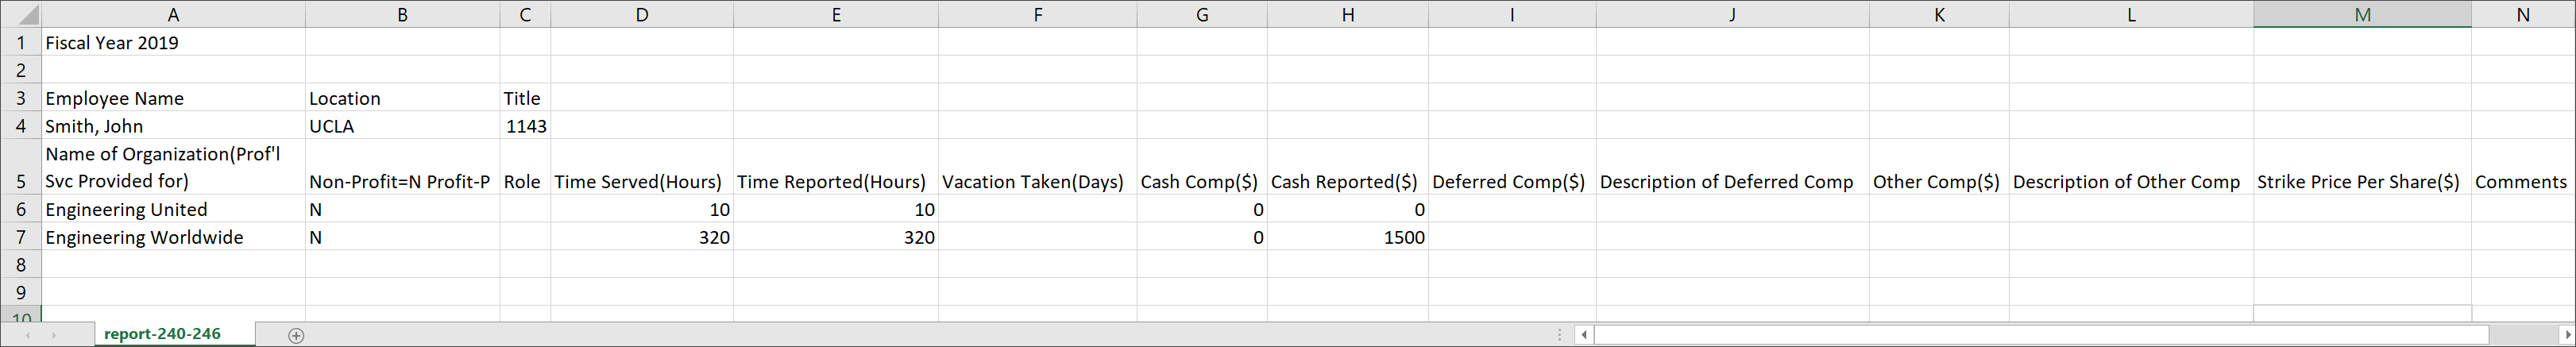 example of dean and 100% faculty administrator report in a spreadsheet